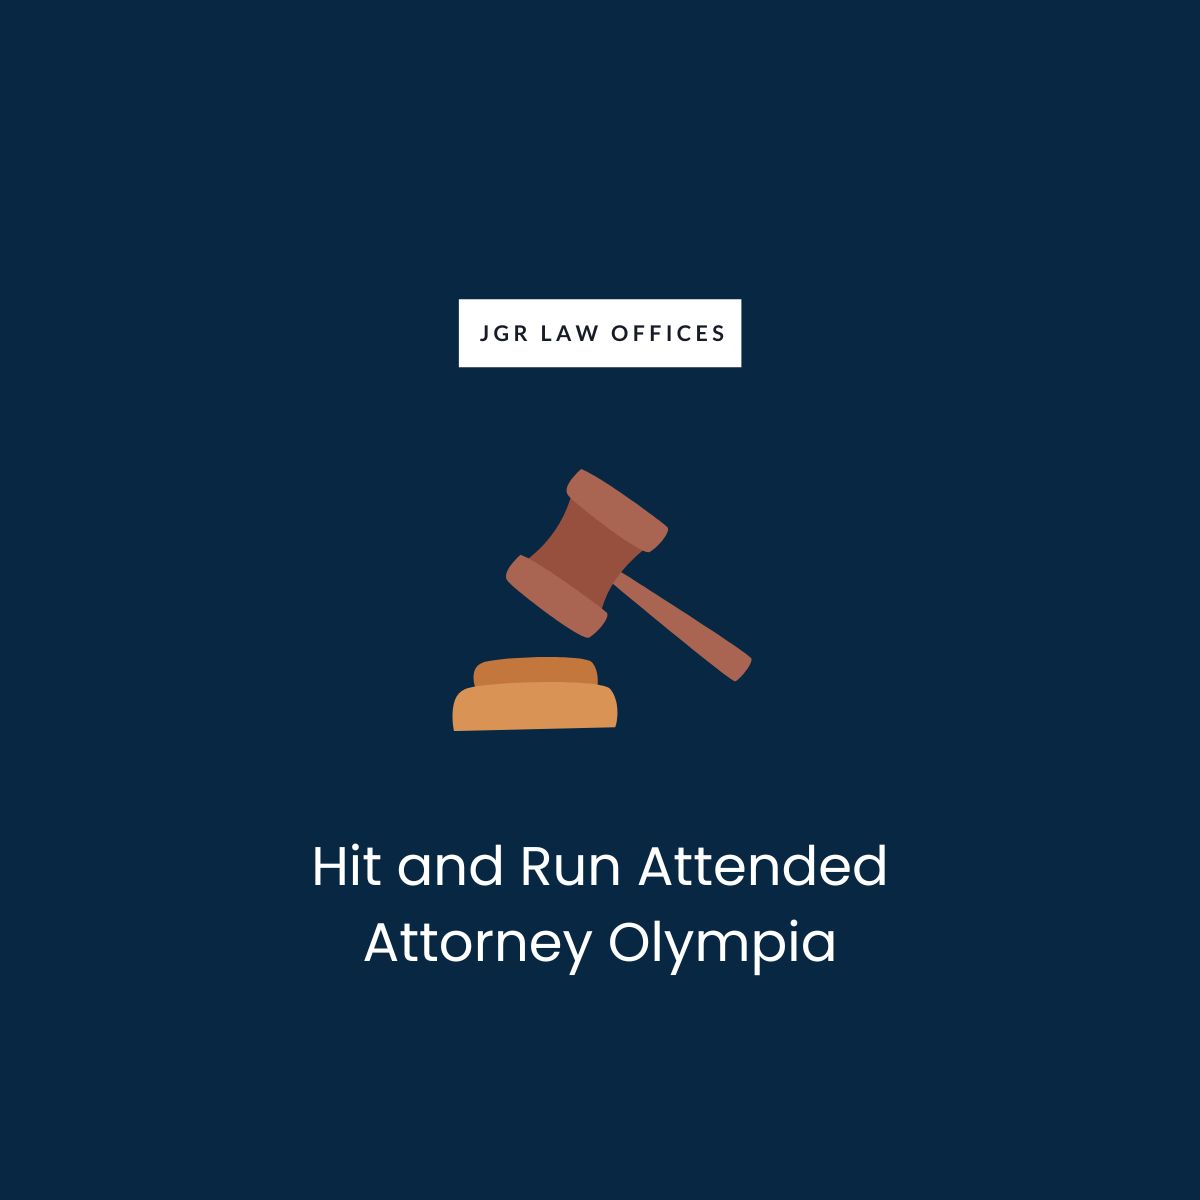 Hit and Run Attended Attorney Olympia